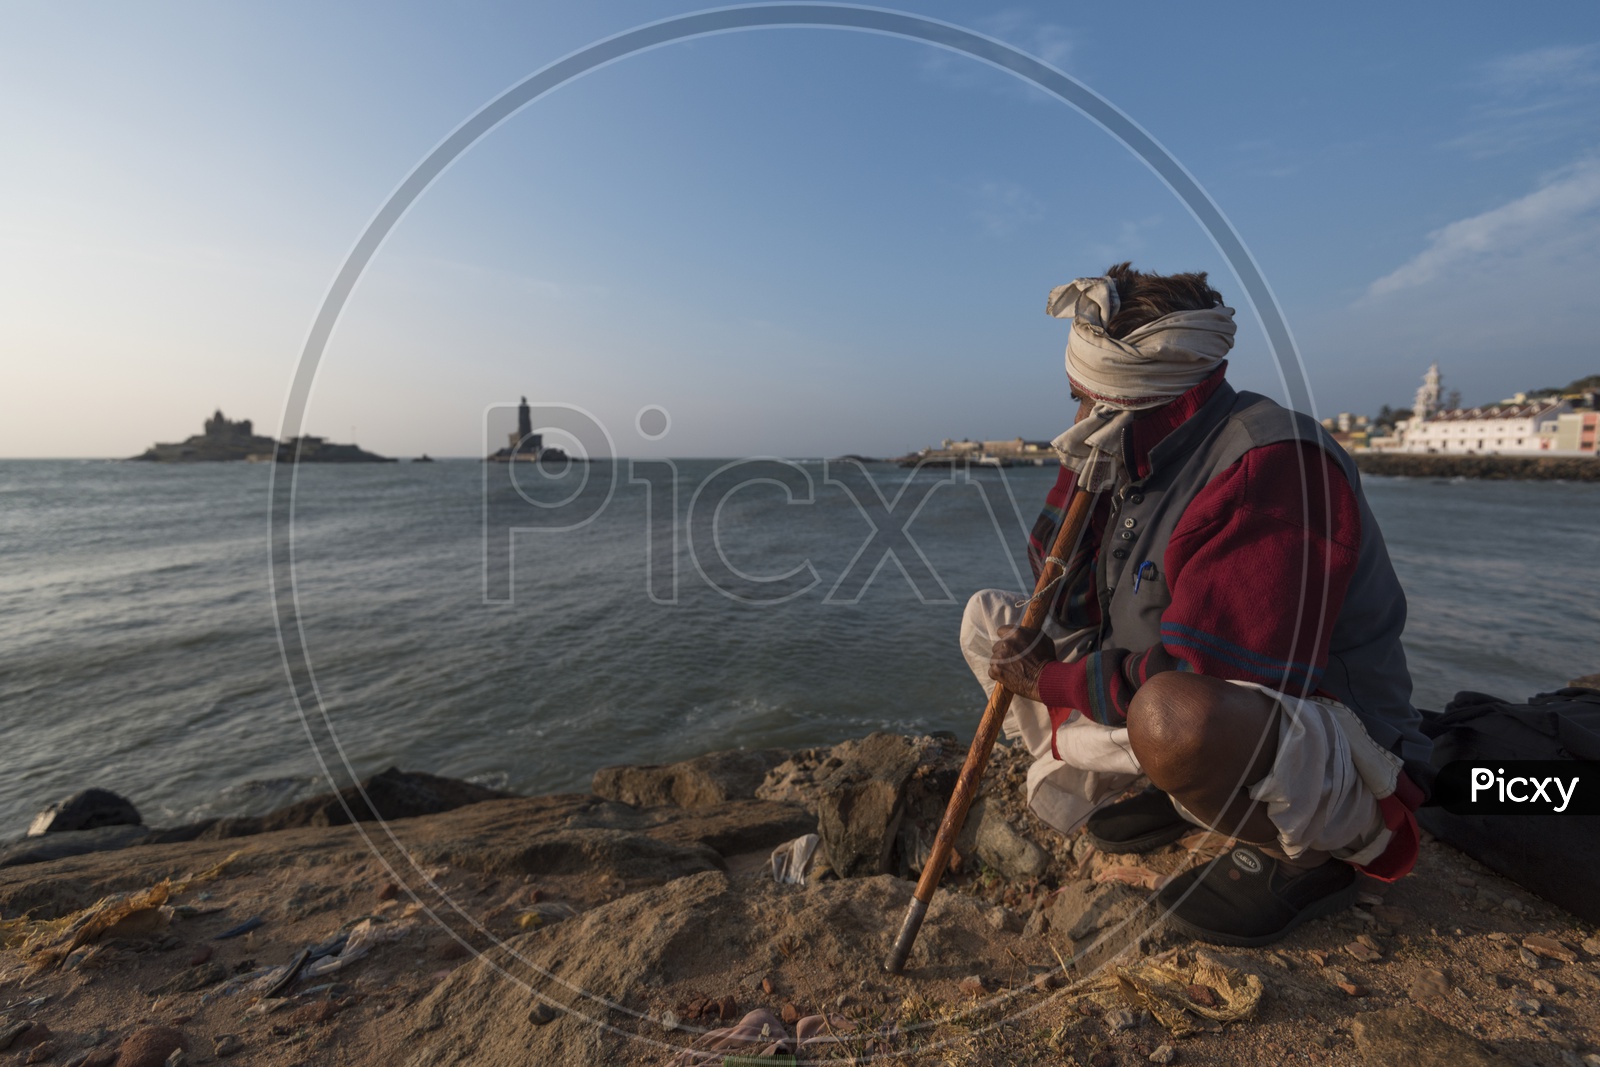 A man in Indian traditional attire at the beach